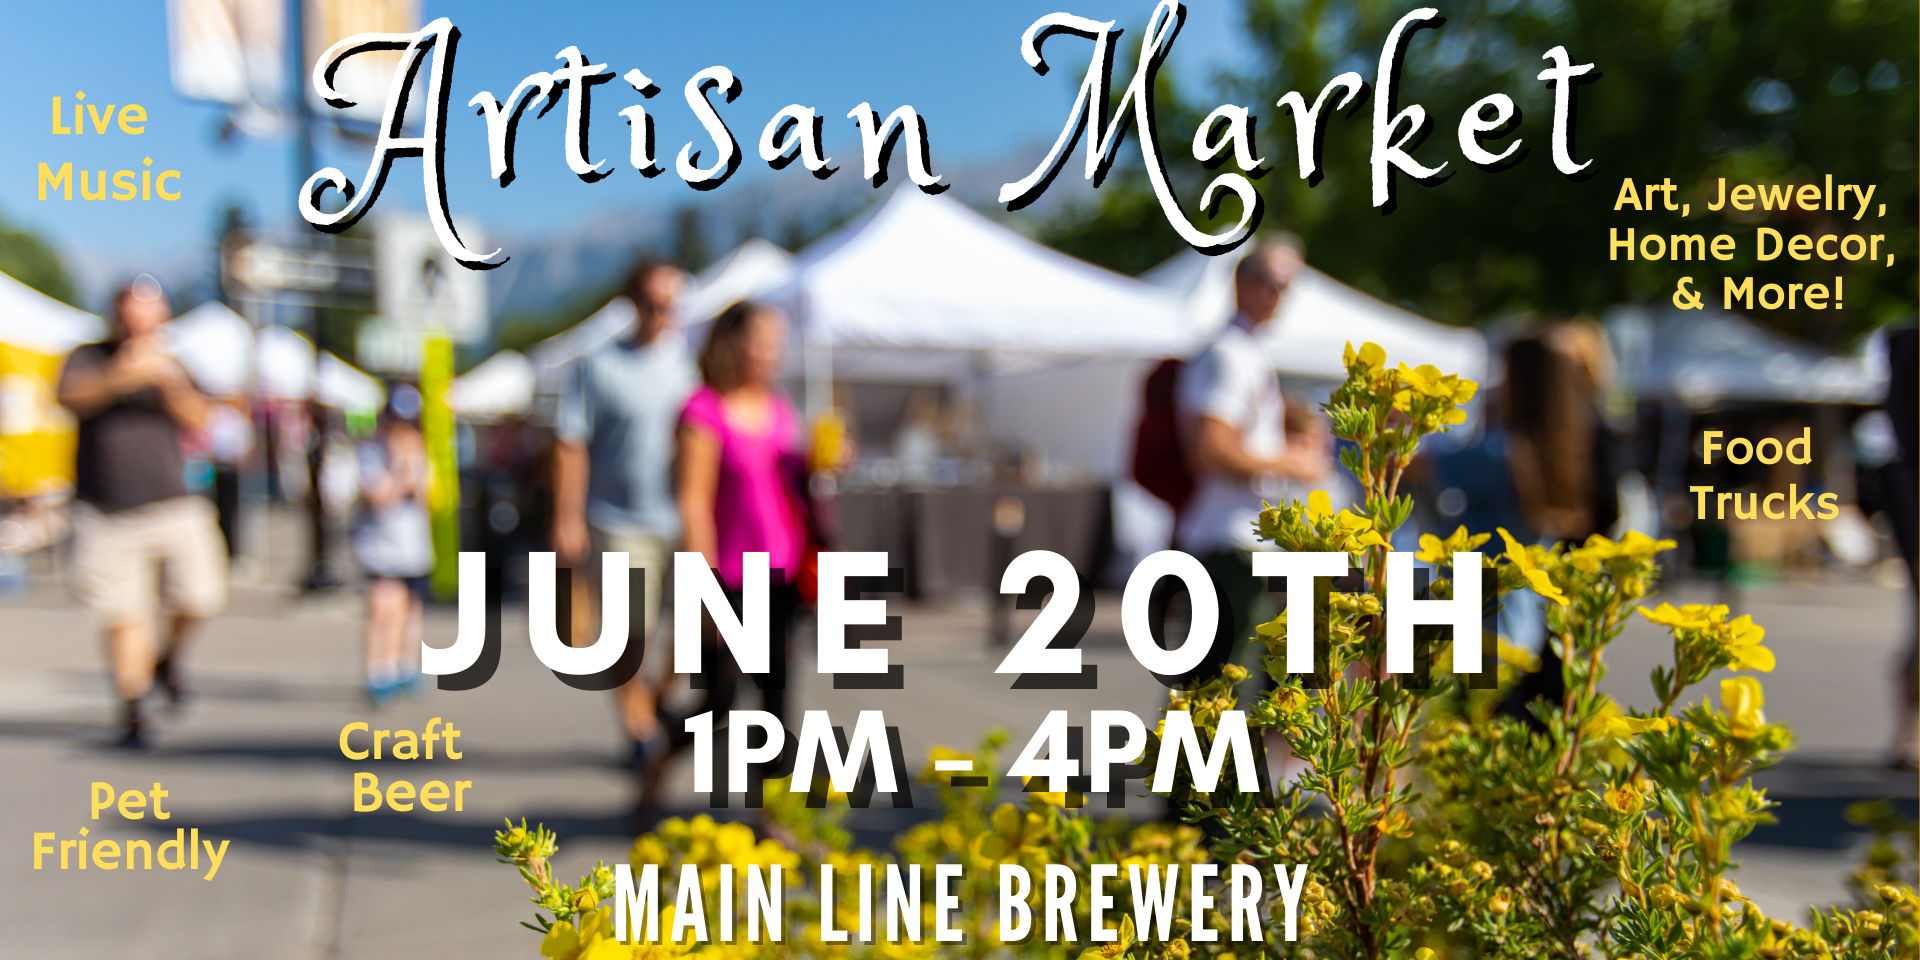 Summer Artisan Market at Main Line Brewery  promotional image